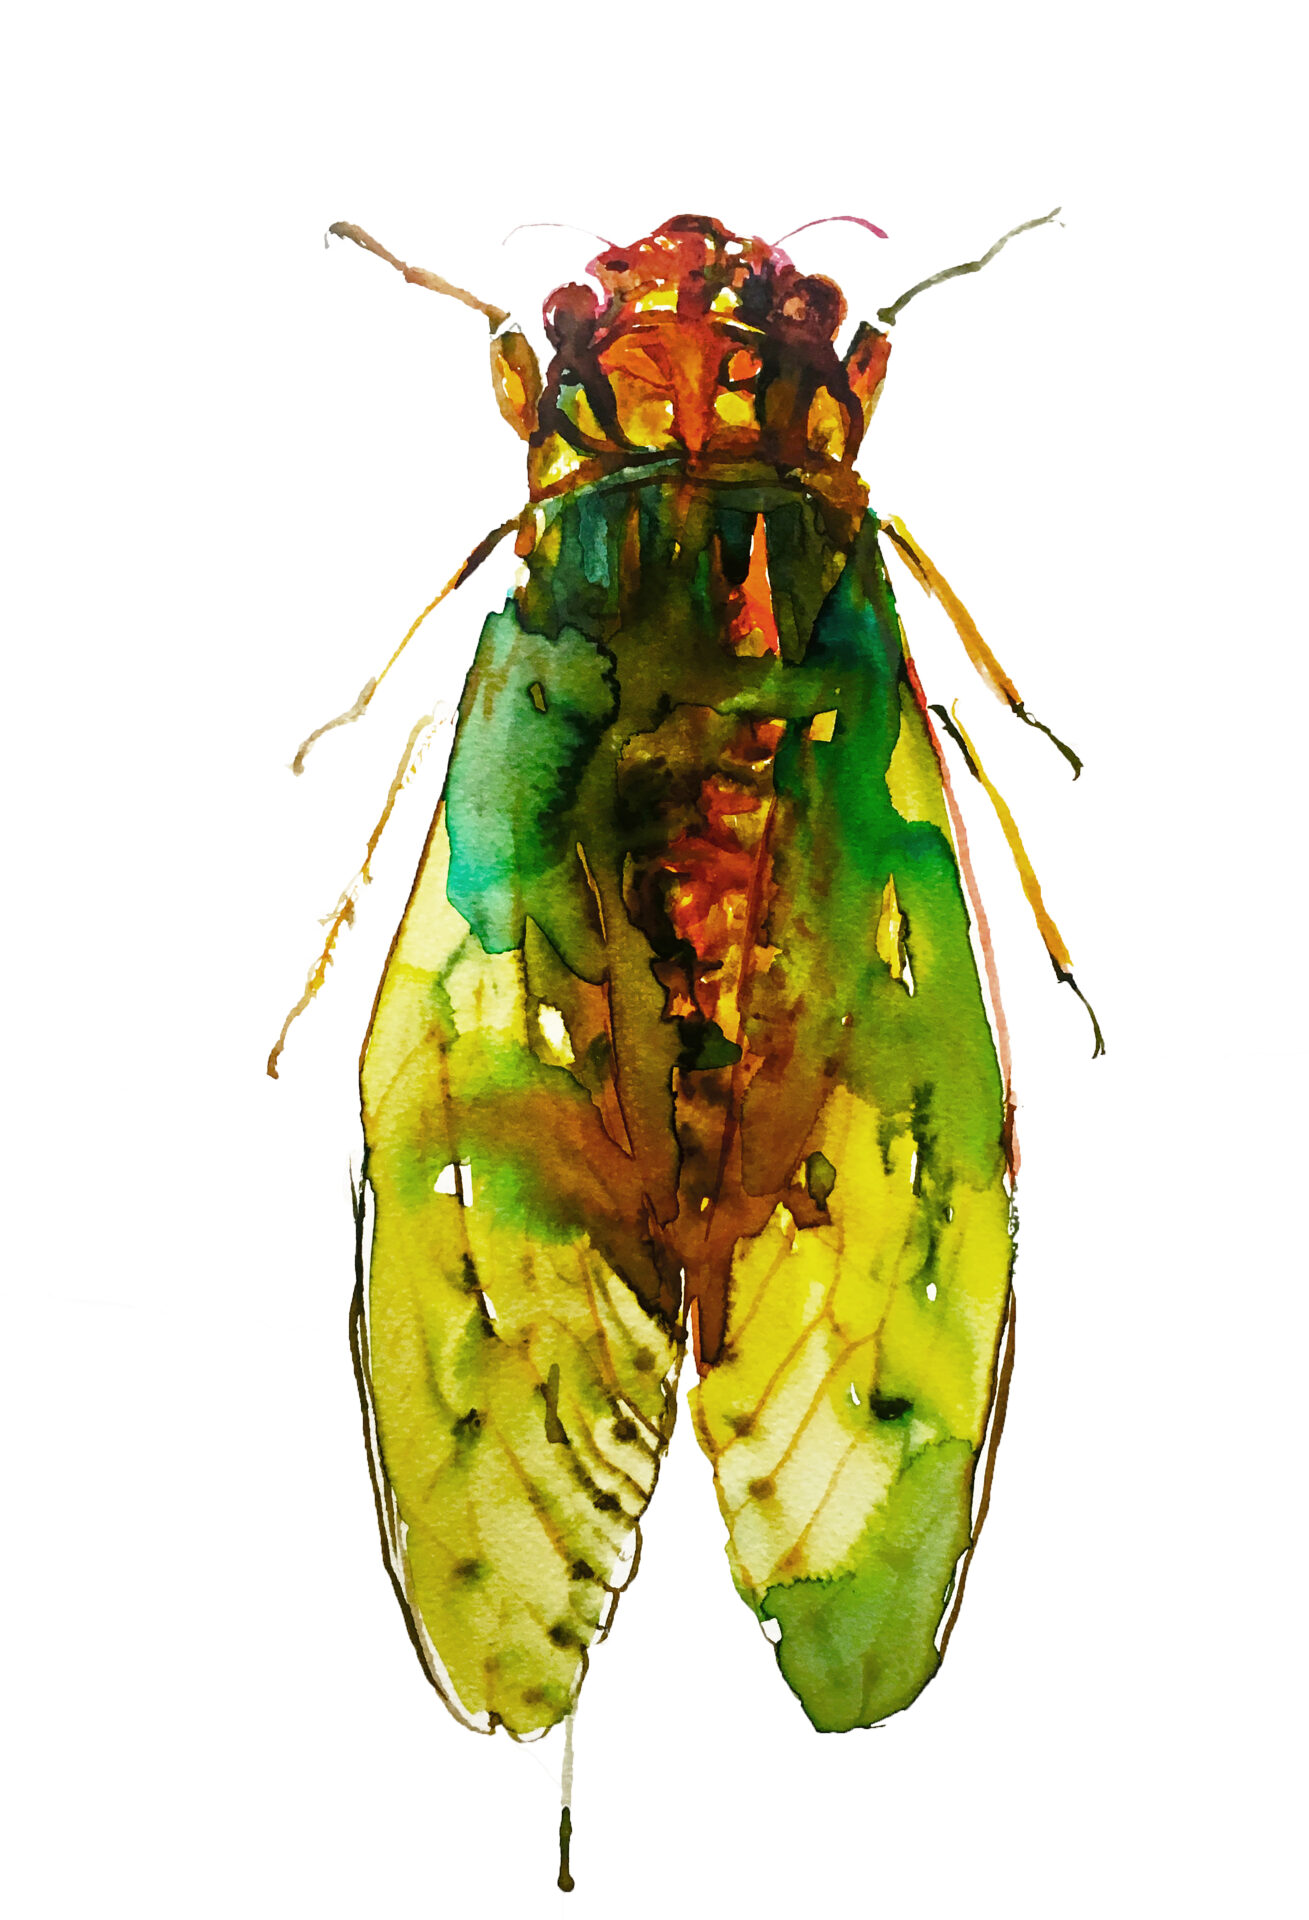 Green Cicada is part of my watercolour series.